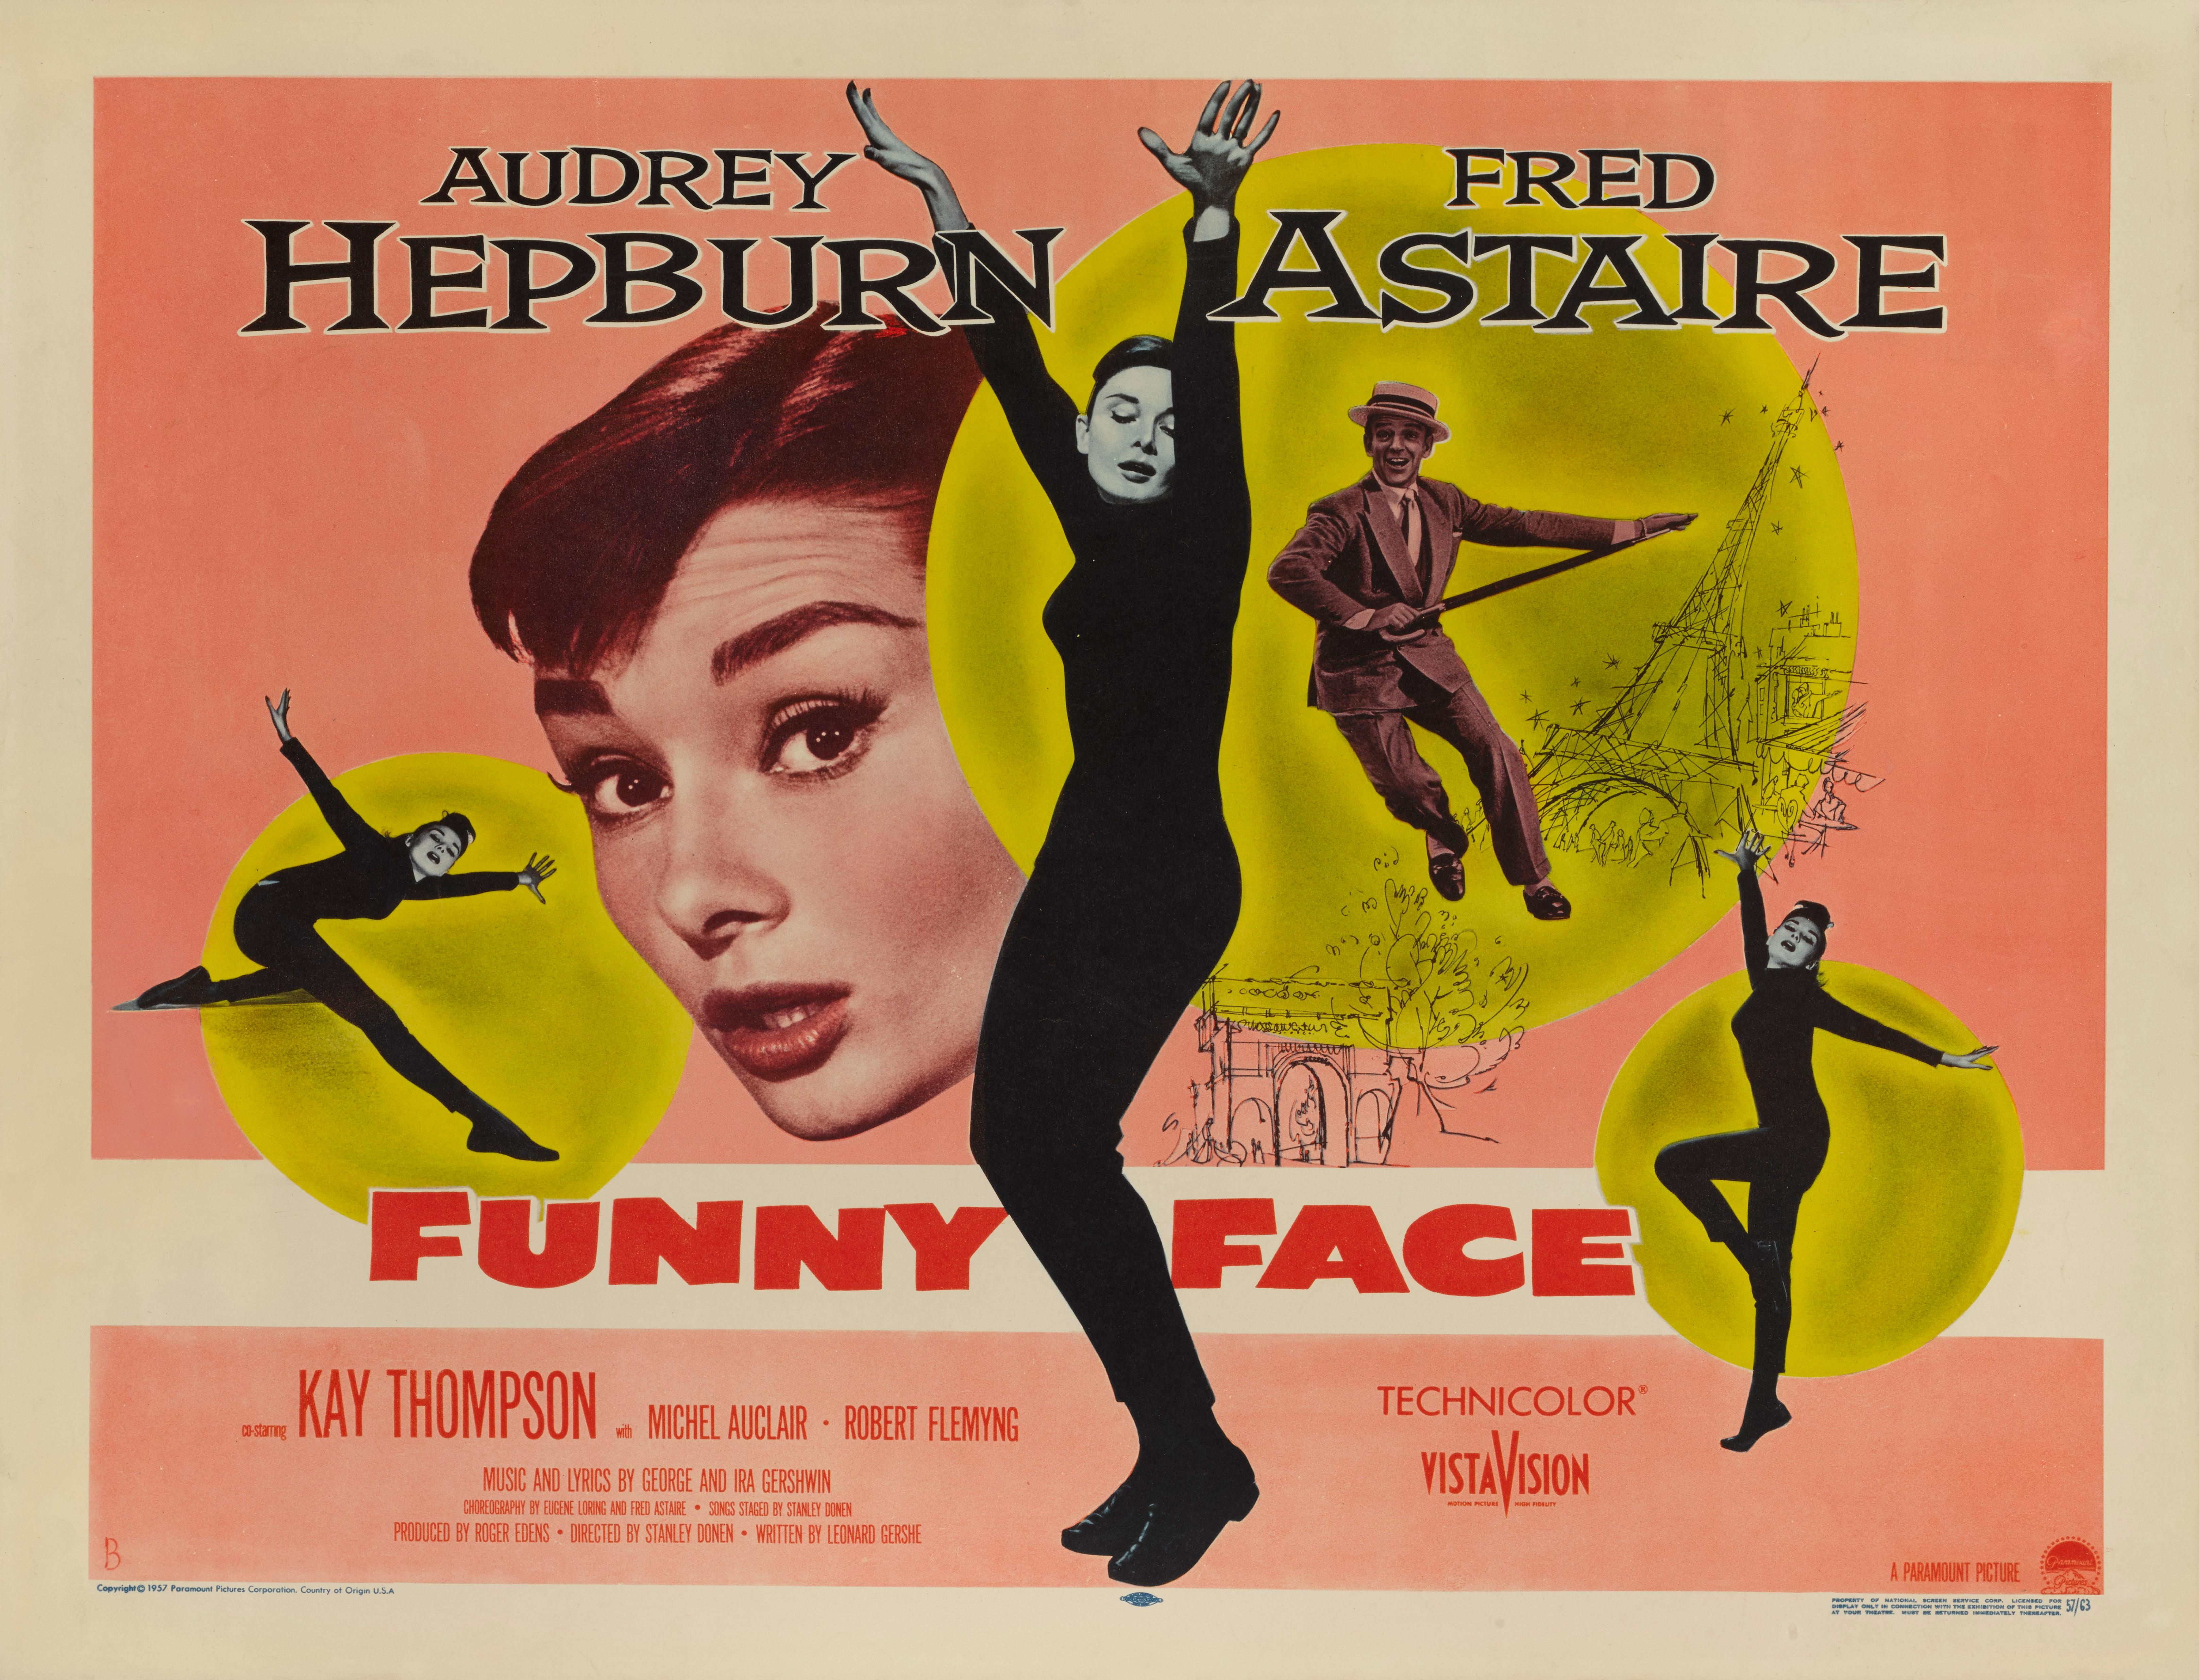 Original US style B film poster for Funny Face 1956.
This musical romance was directed by Stanley Donen and written by Leonard Gershe, and features numbers by George and Ira Gershwin. Audrey Hepburn stars alongside Fred Astaire, who was in the